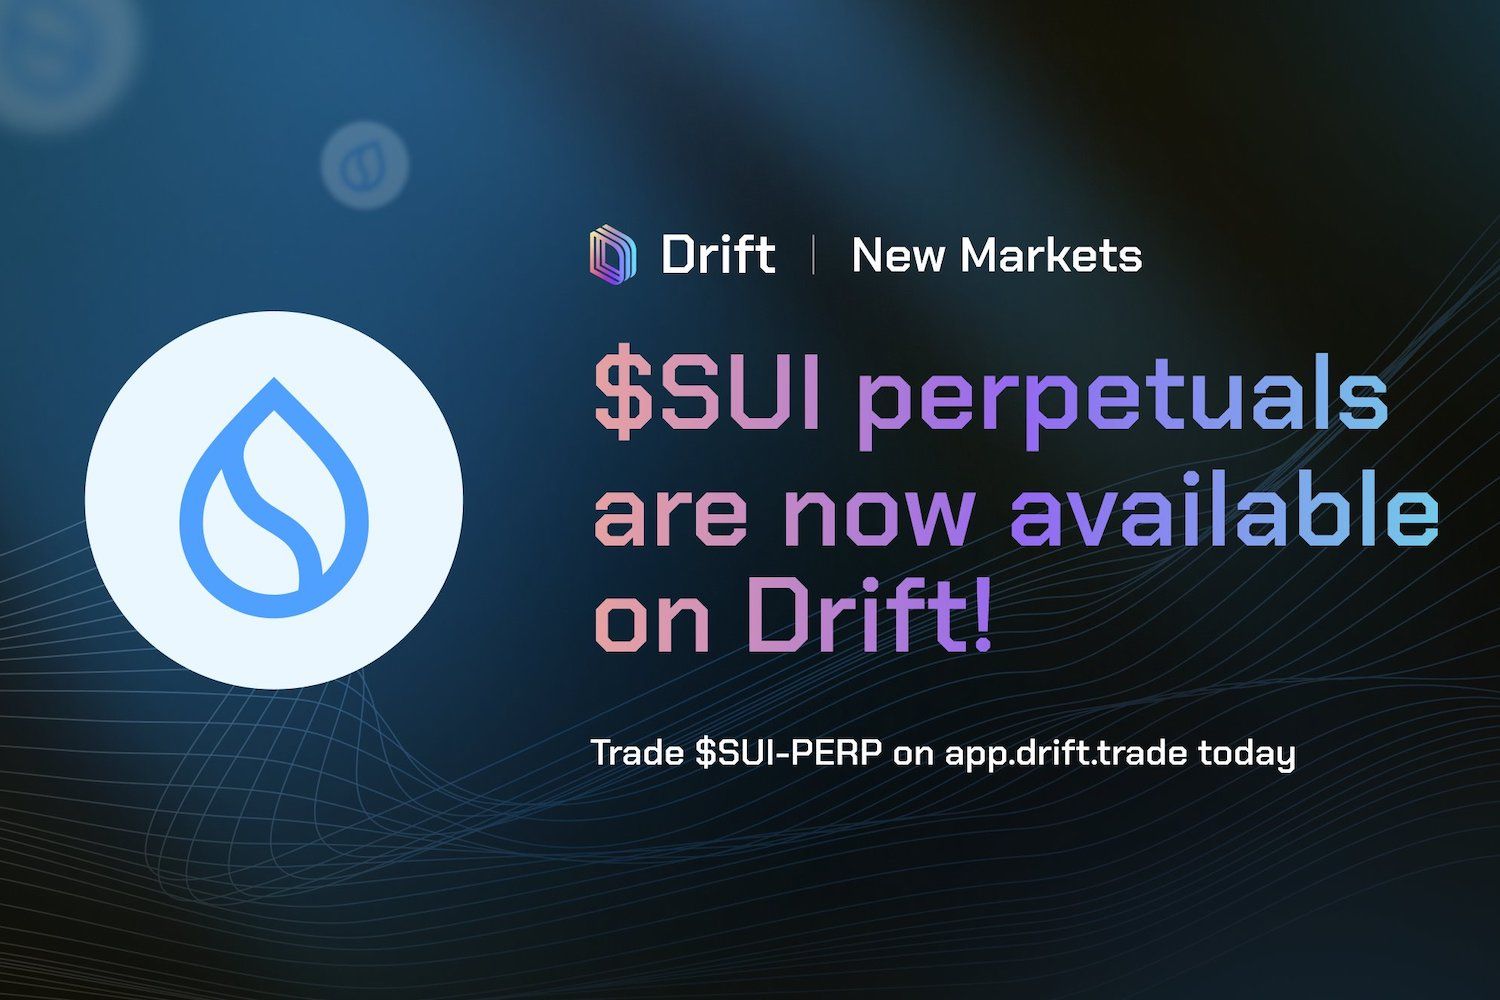 Solana-based Drift Protocol Becomes First DEX to List $SUI Perpetuals